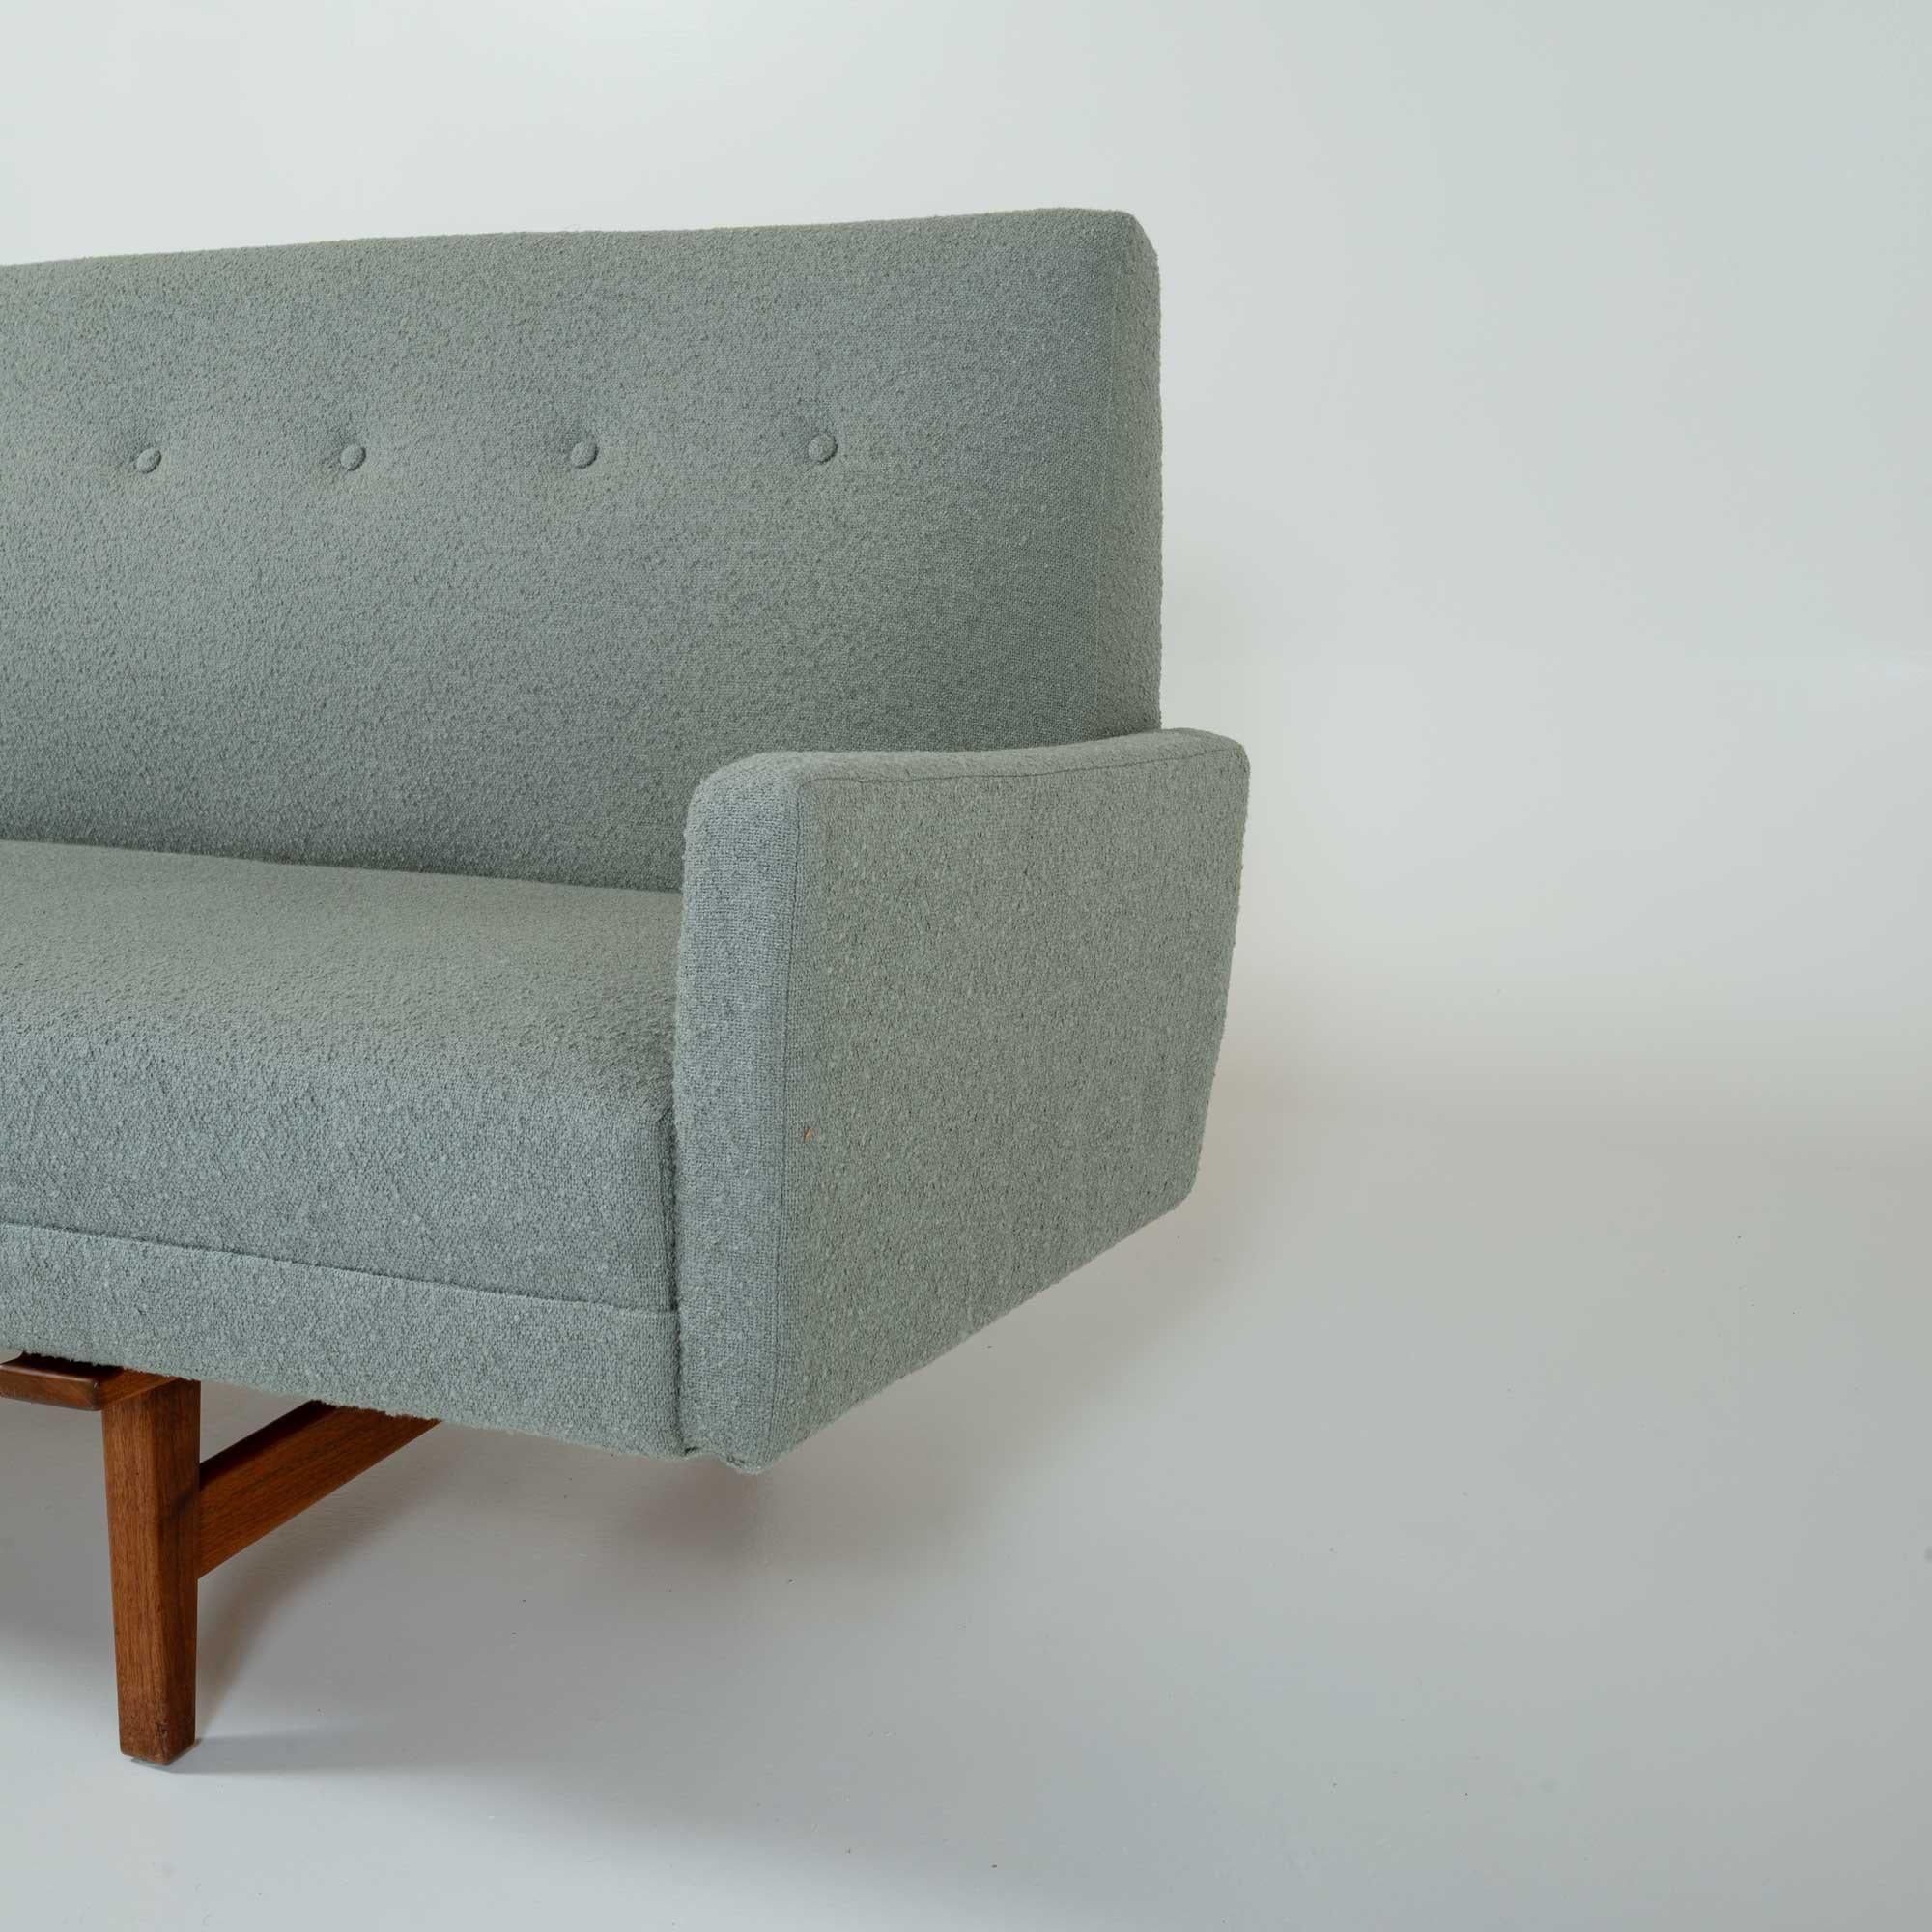 Mid-20th Century Jen Risom for Jen Risom Inc Three Seater Sofa Reupholstered in Teal Bouclé